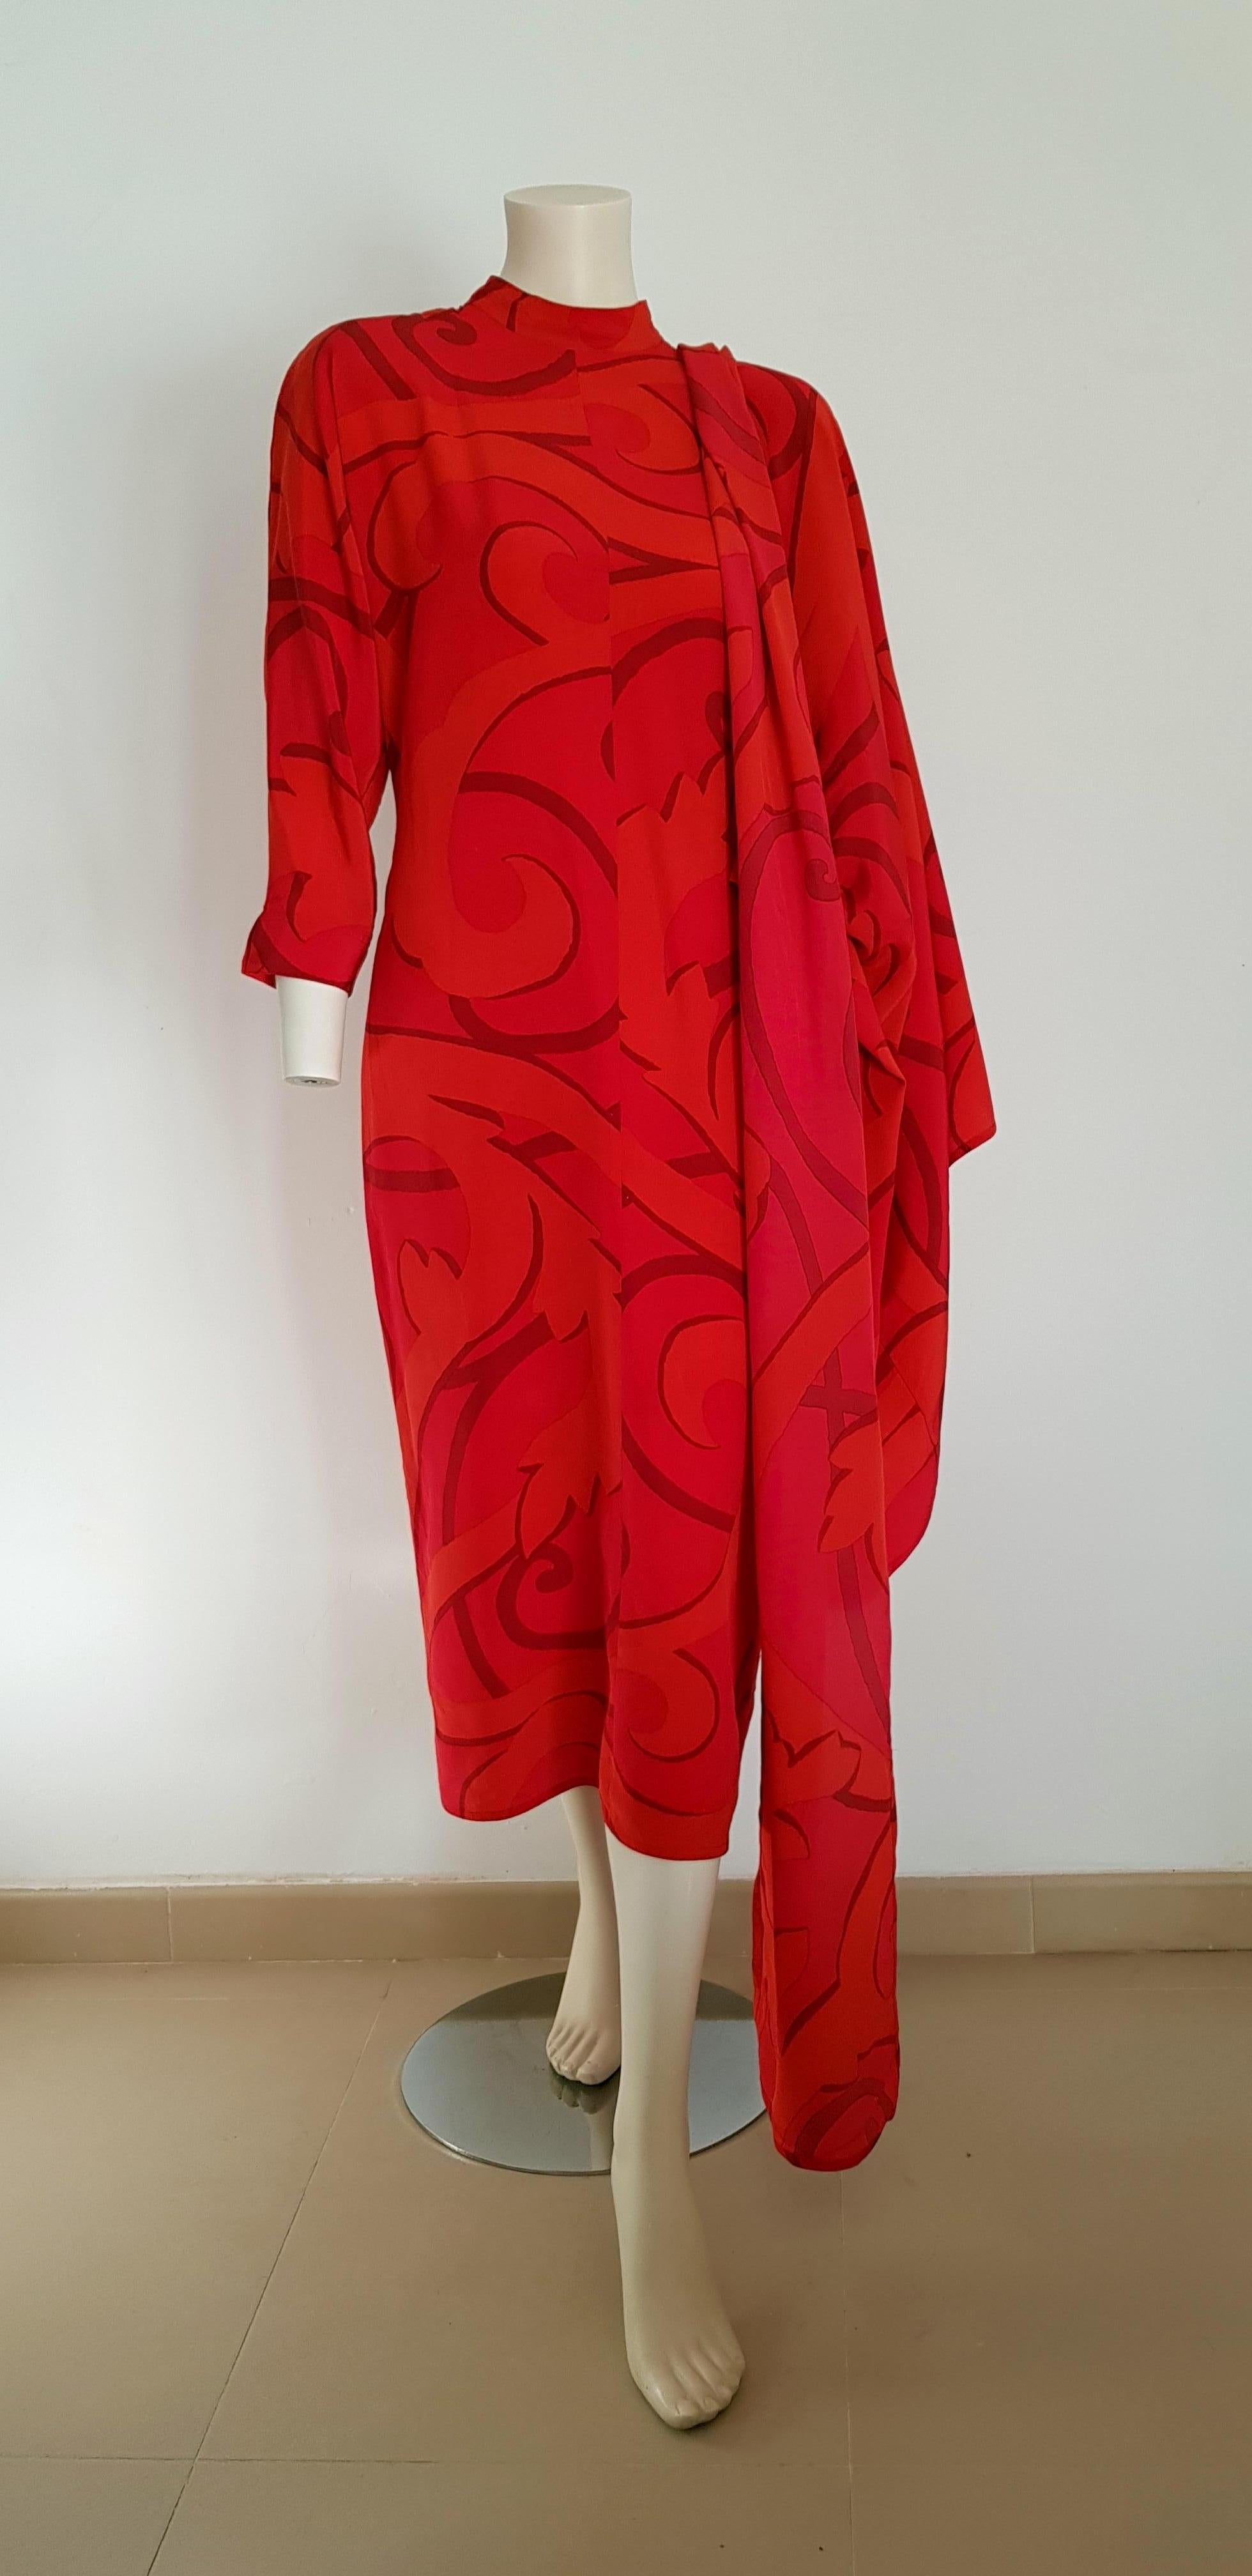 Gianfranco FERRÉ Couture Red Silk Dress with Skirt Foulard - Unworn For Sale 1